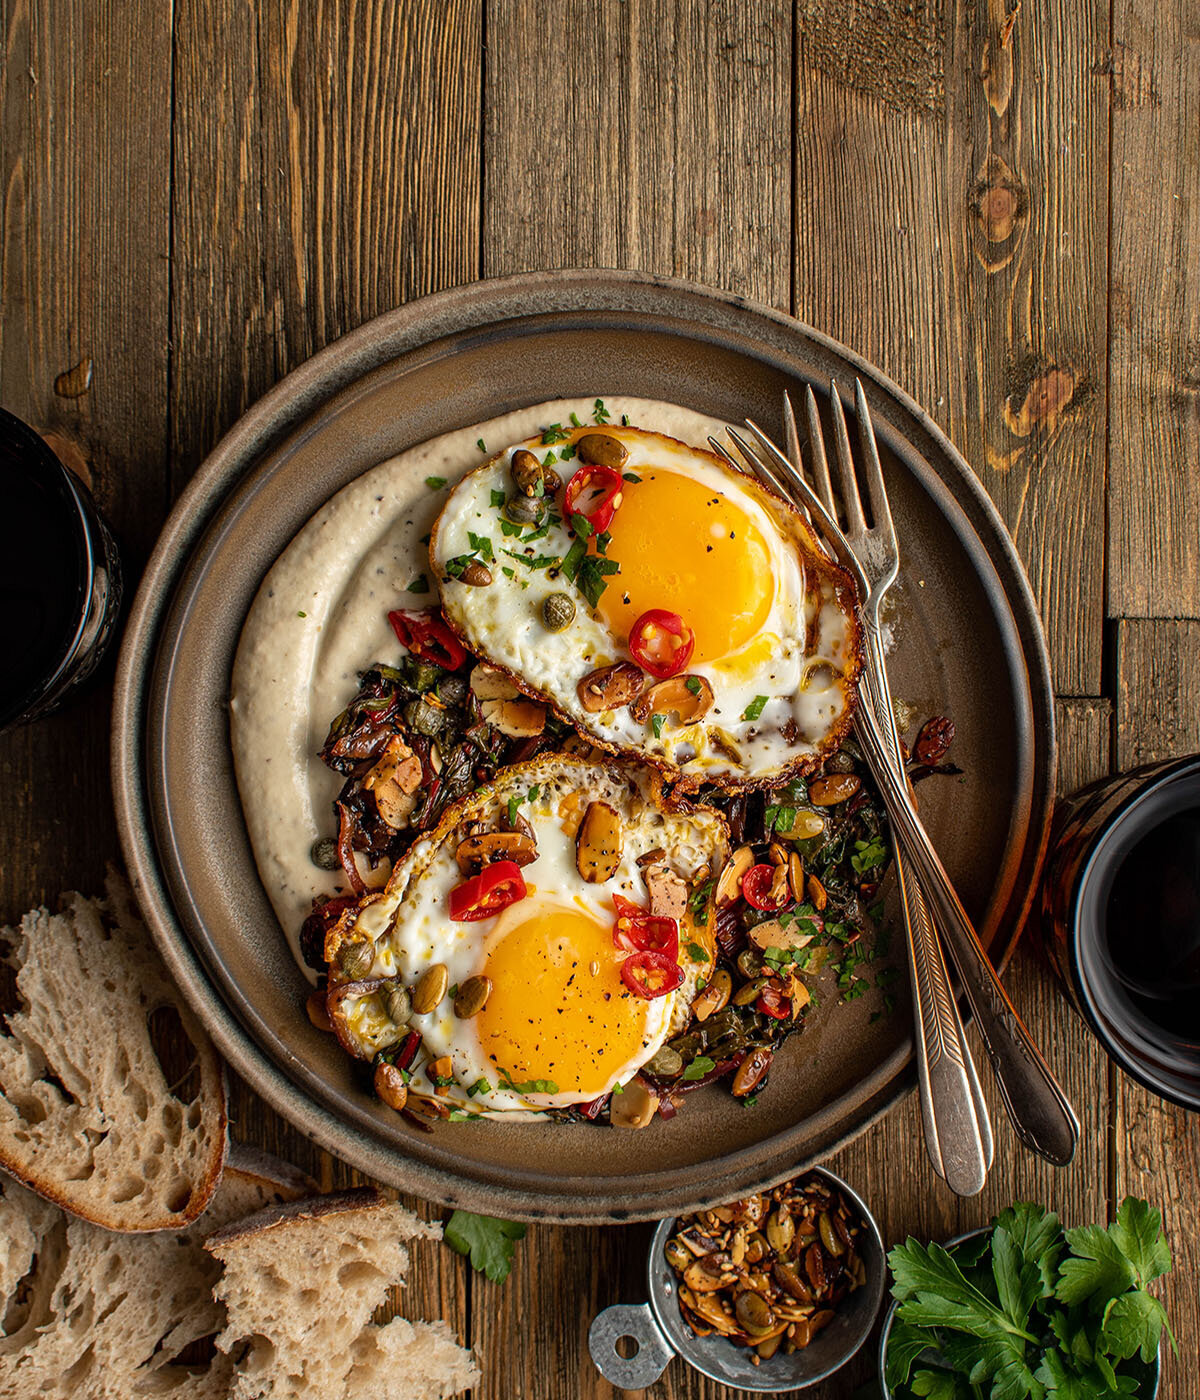 calabrian chile fried eggs